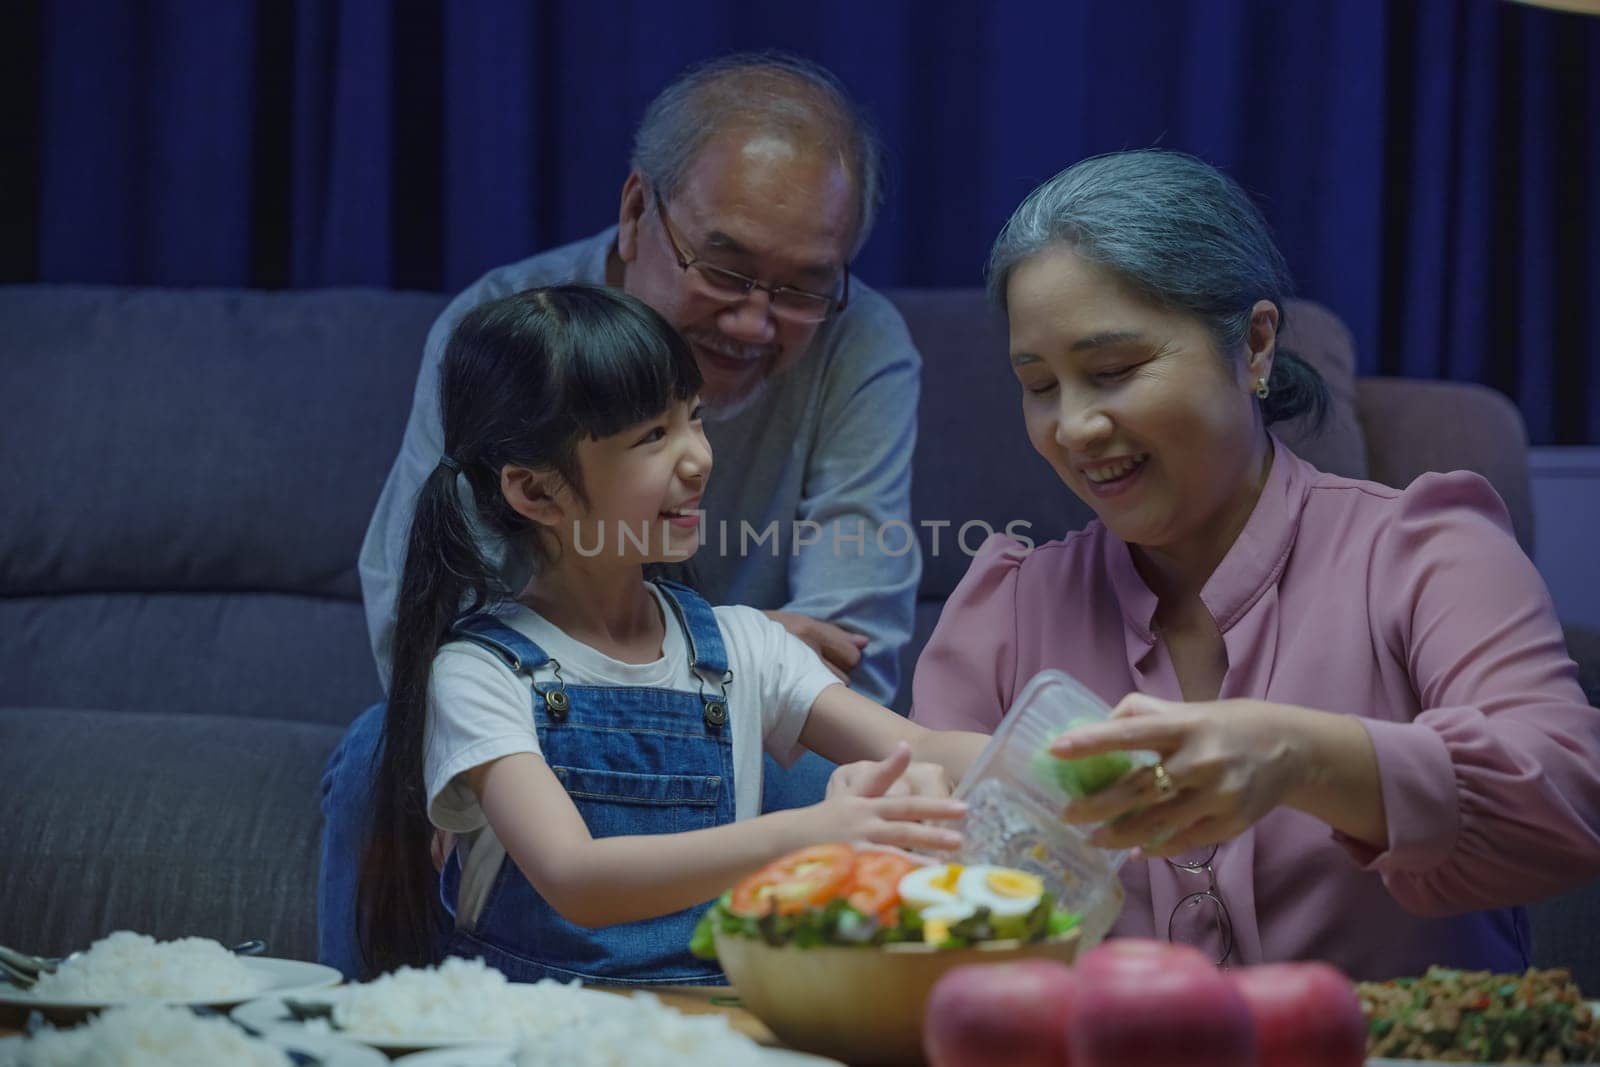 Happy Asian senior parent and child eating dinner food together in living room indoors, family grandmother grandfather and granddaughter dining on table and having fun during at home night time